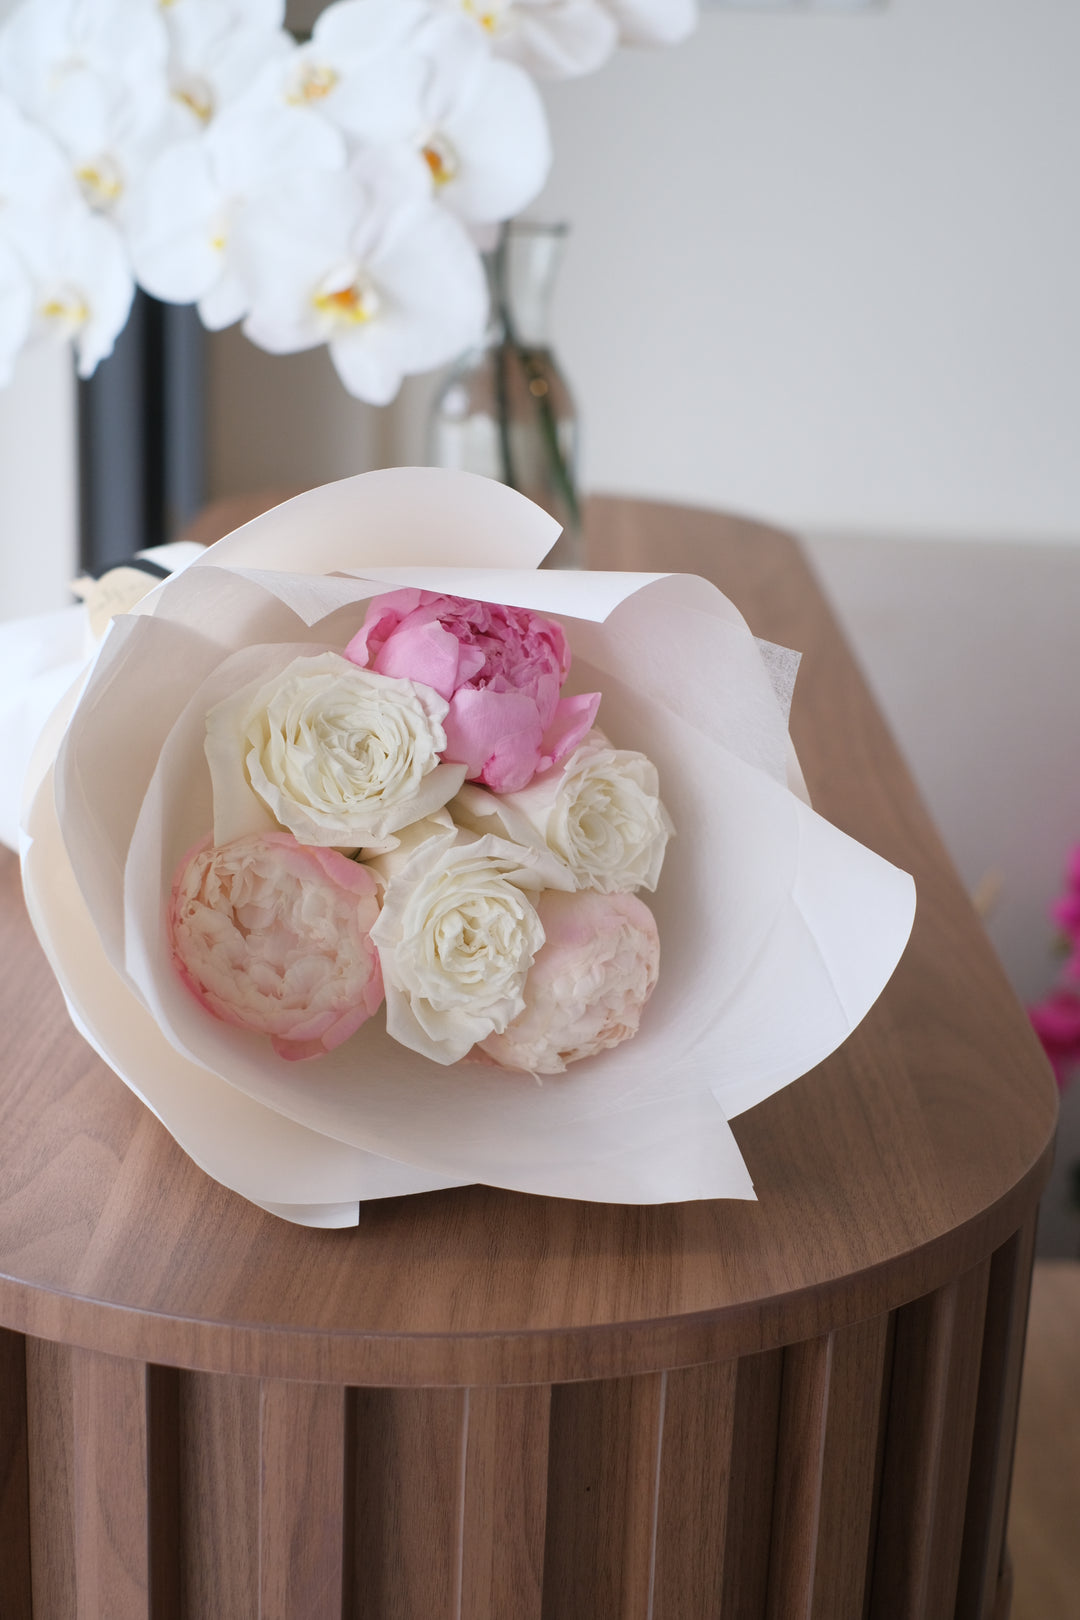 roses in white at floral shop, peonies in pink via florist online, white wrapping with same day delivery flower